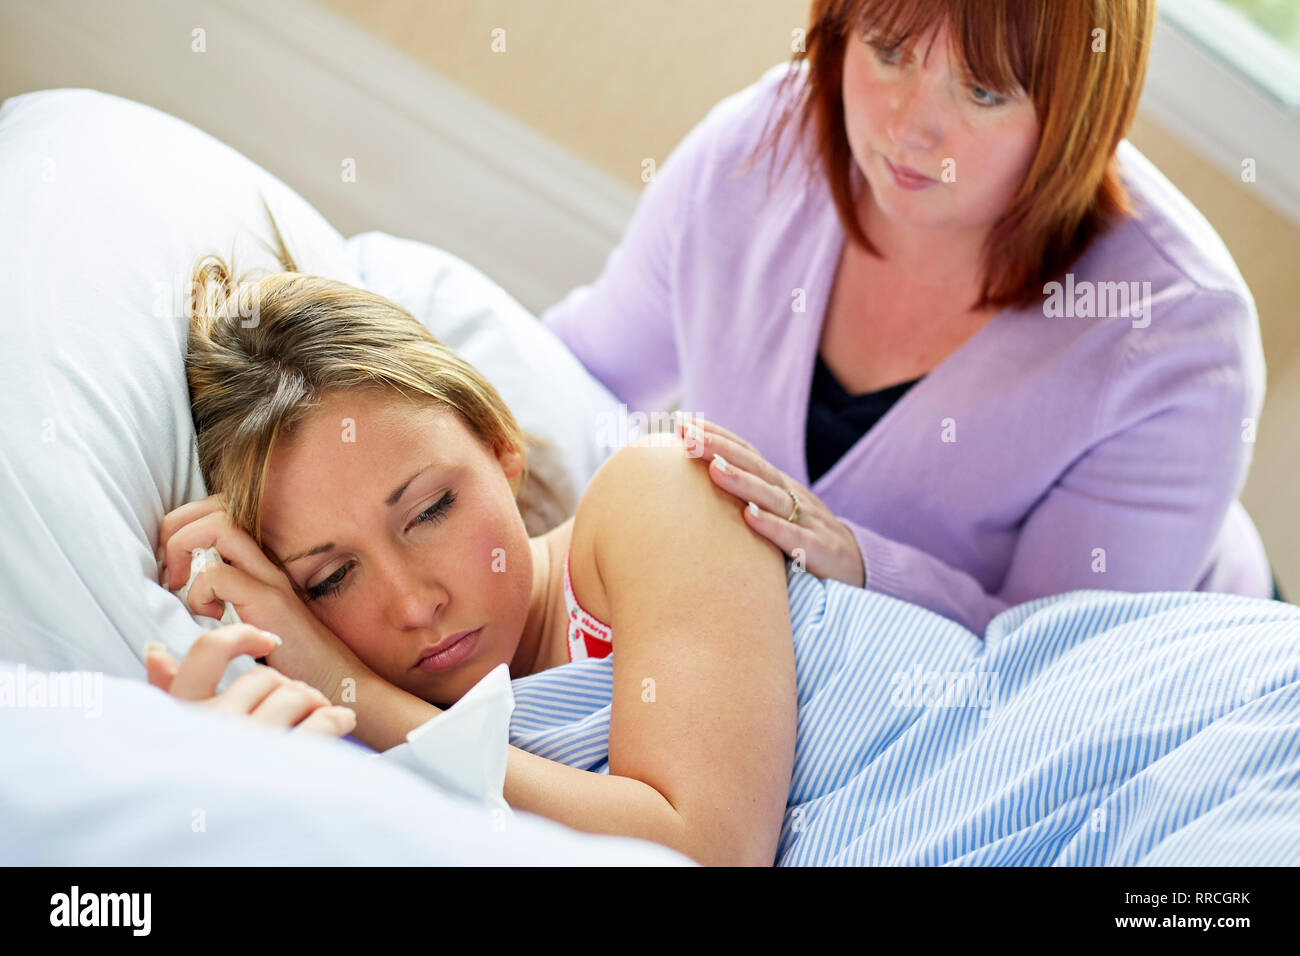 Teenage girl laid in bed with the flu Stock Photo